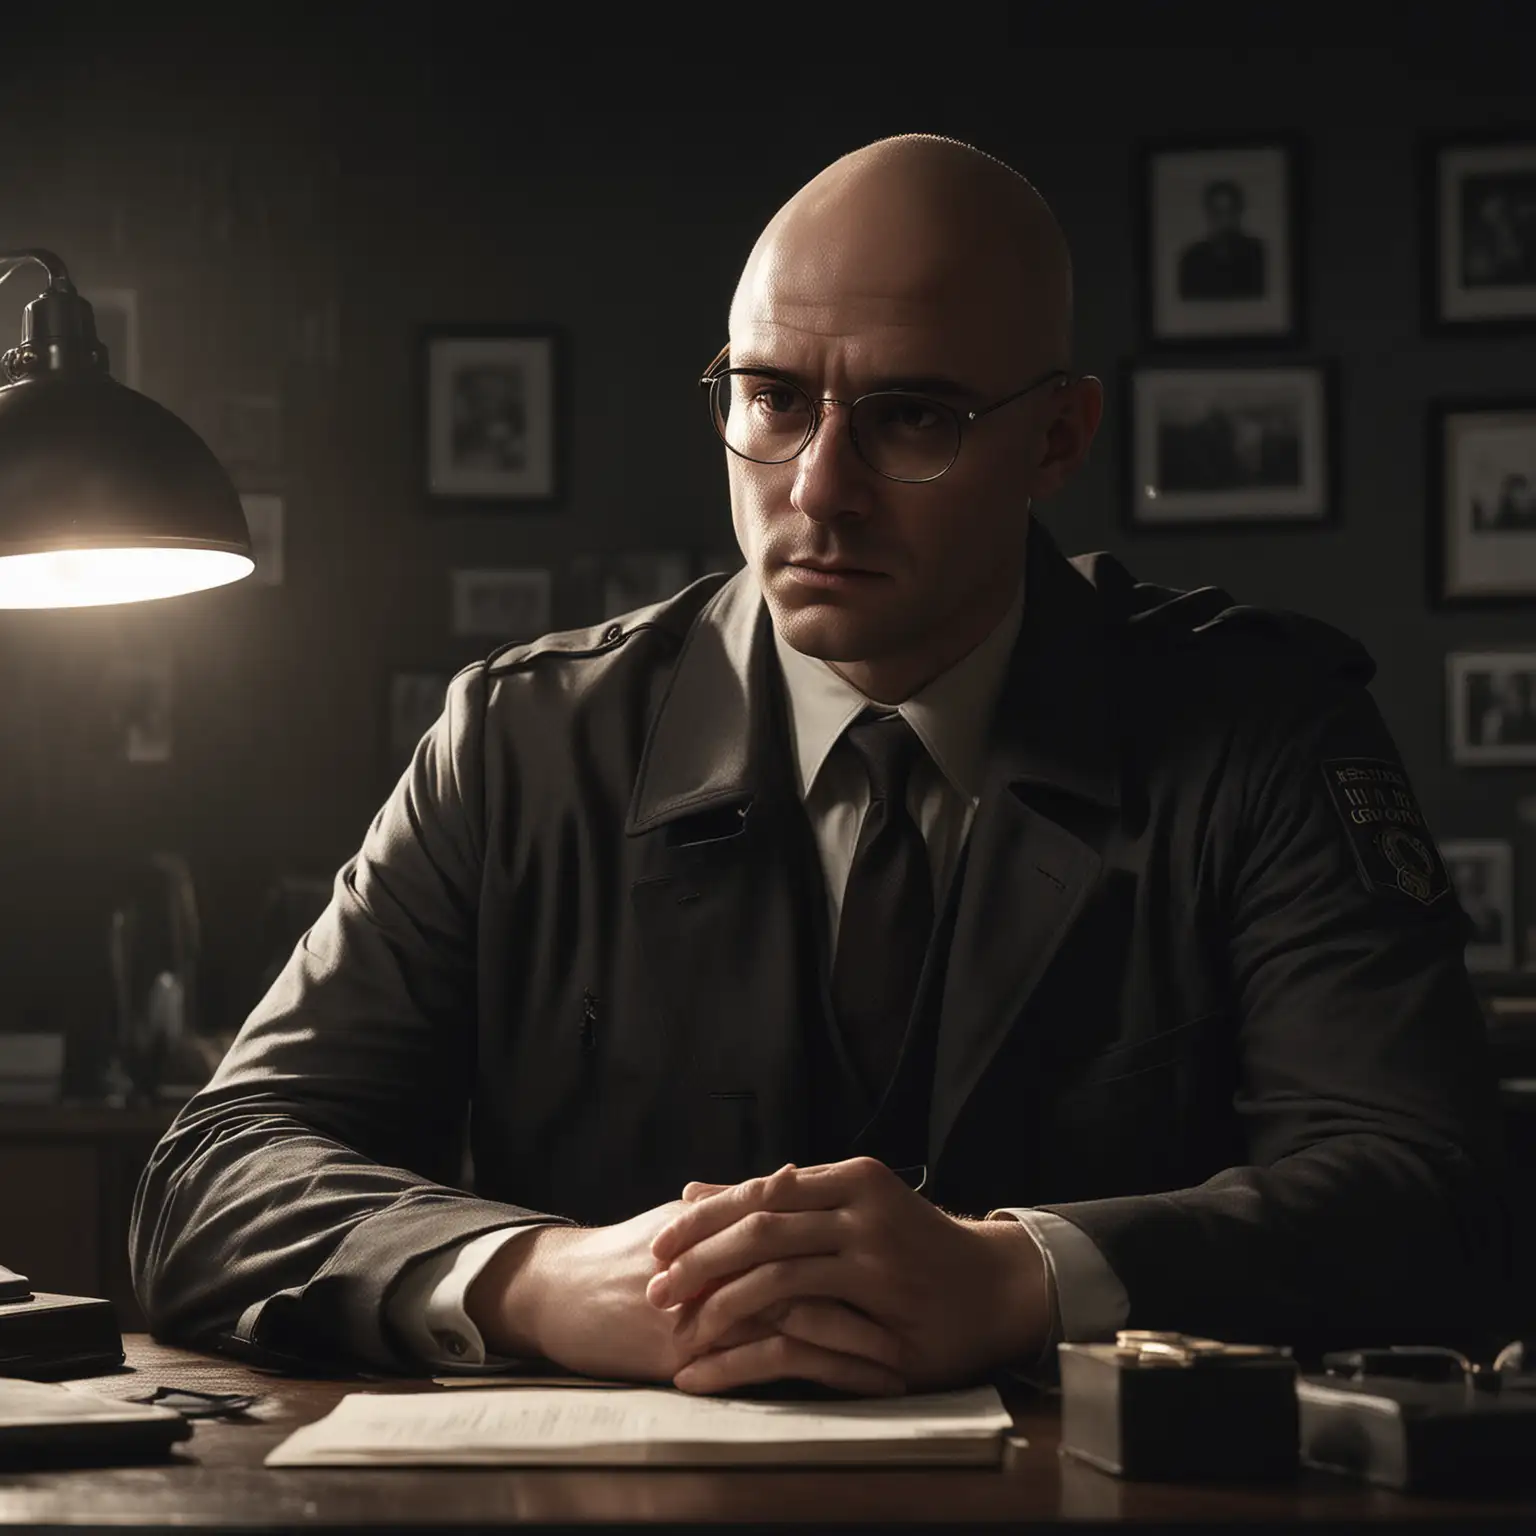 A human male, detective, bald, glasses, sitting in a detective’s office, dark ambient lighting, realistic